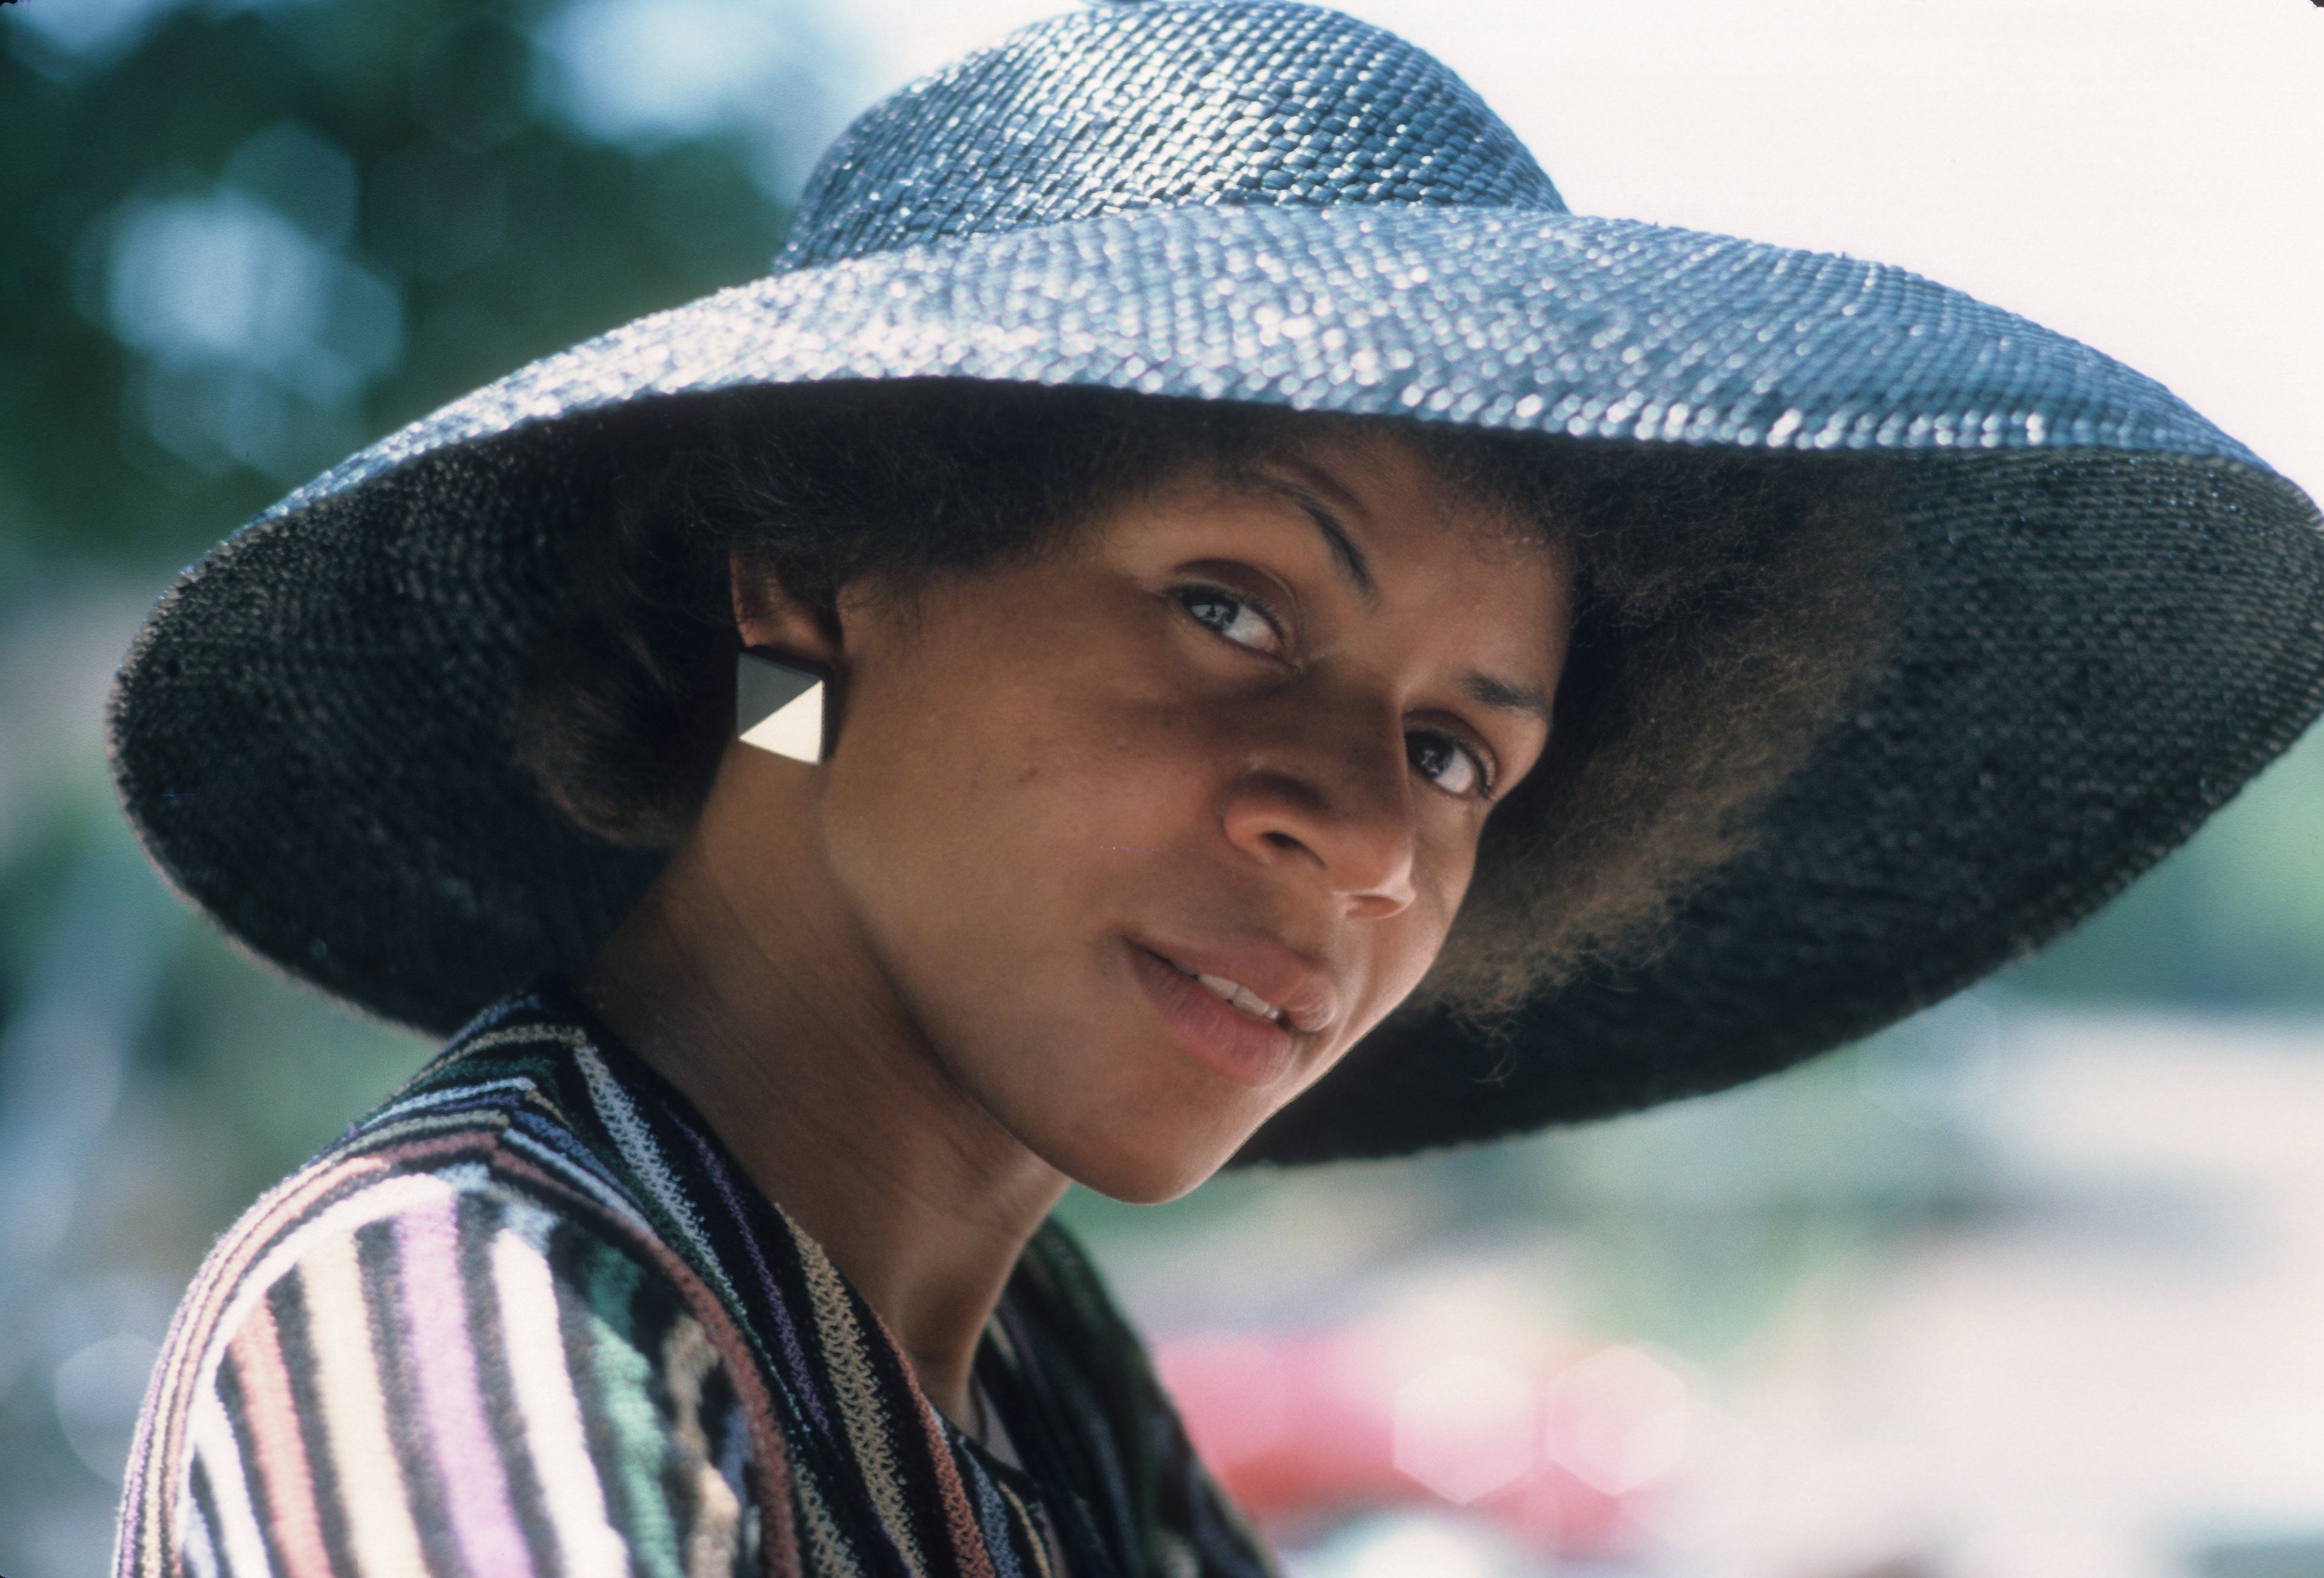  Minnie Riperton poses for a portrait in August 1975 in Los Angeles, California | Photo: Getty Images